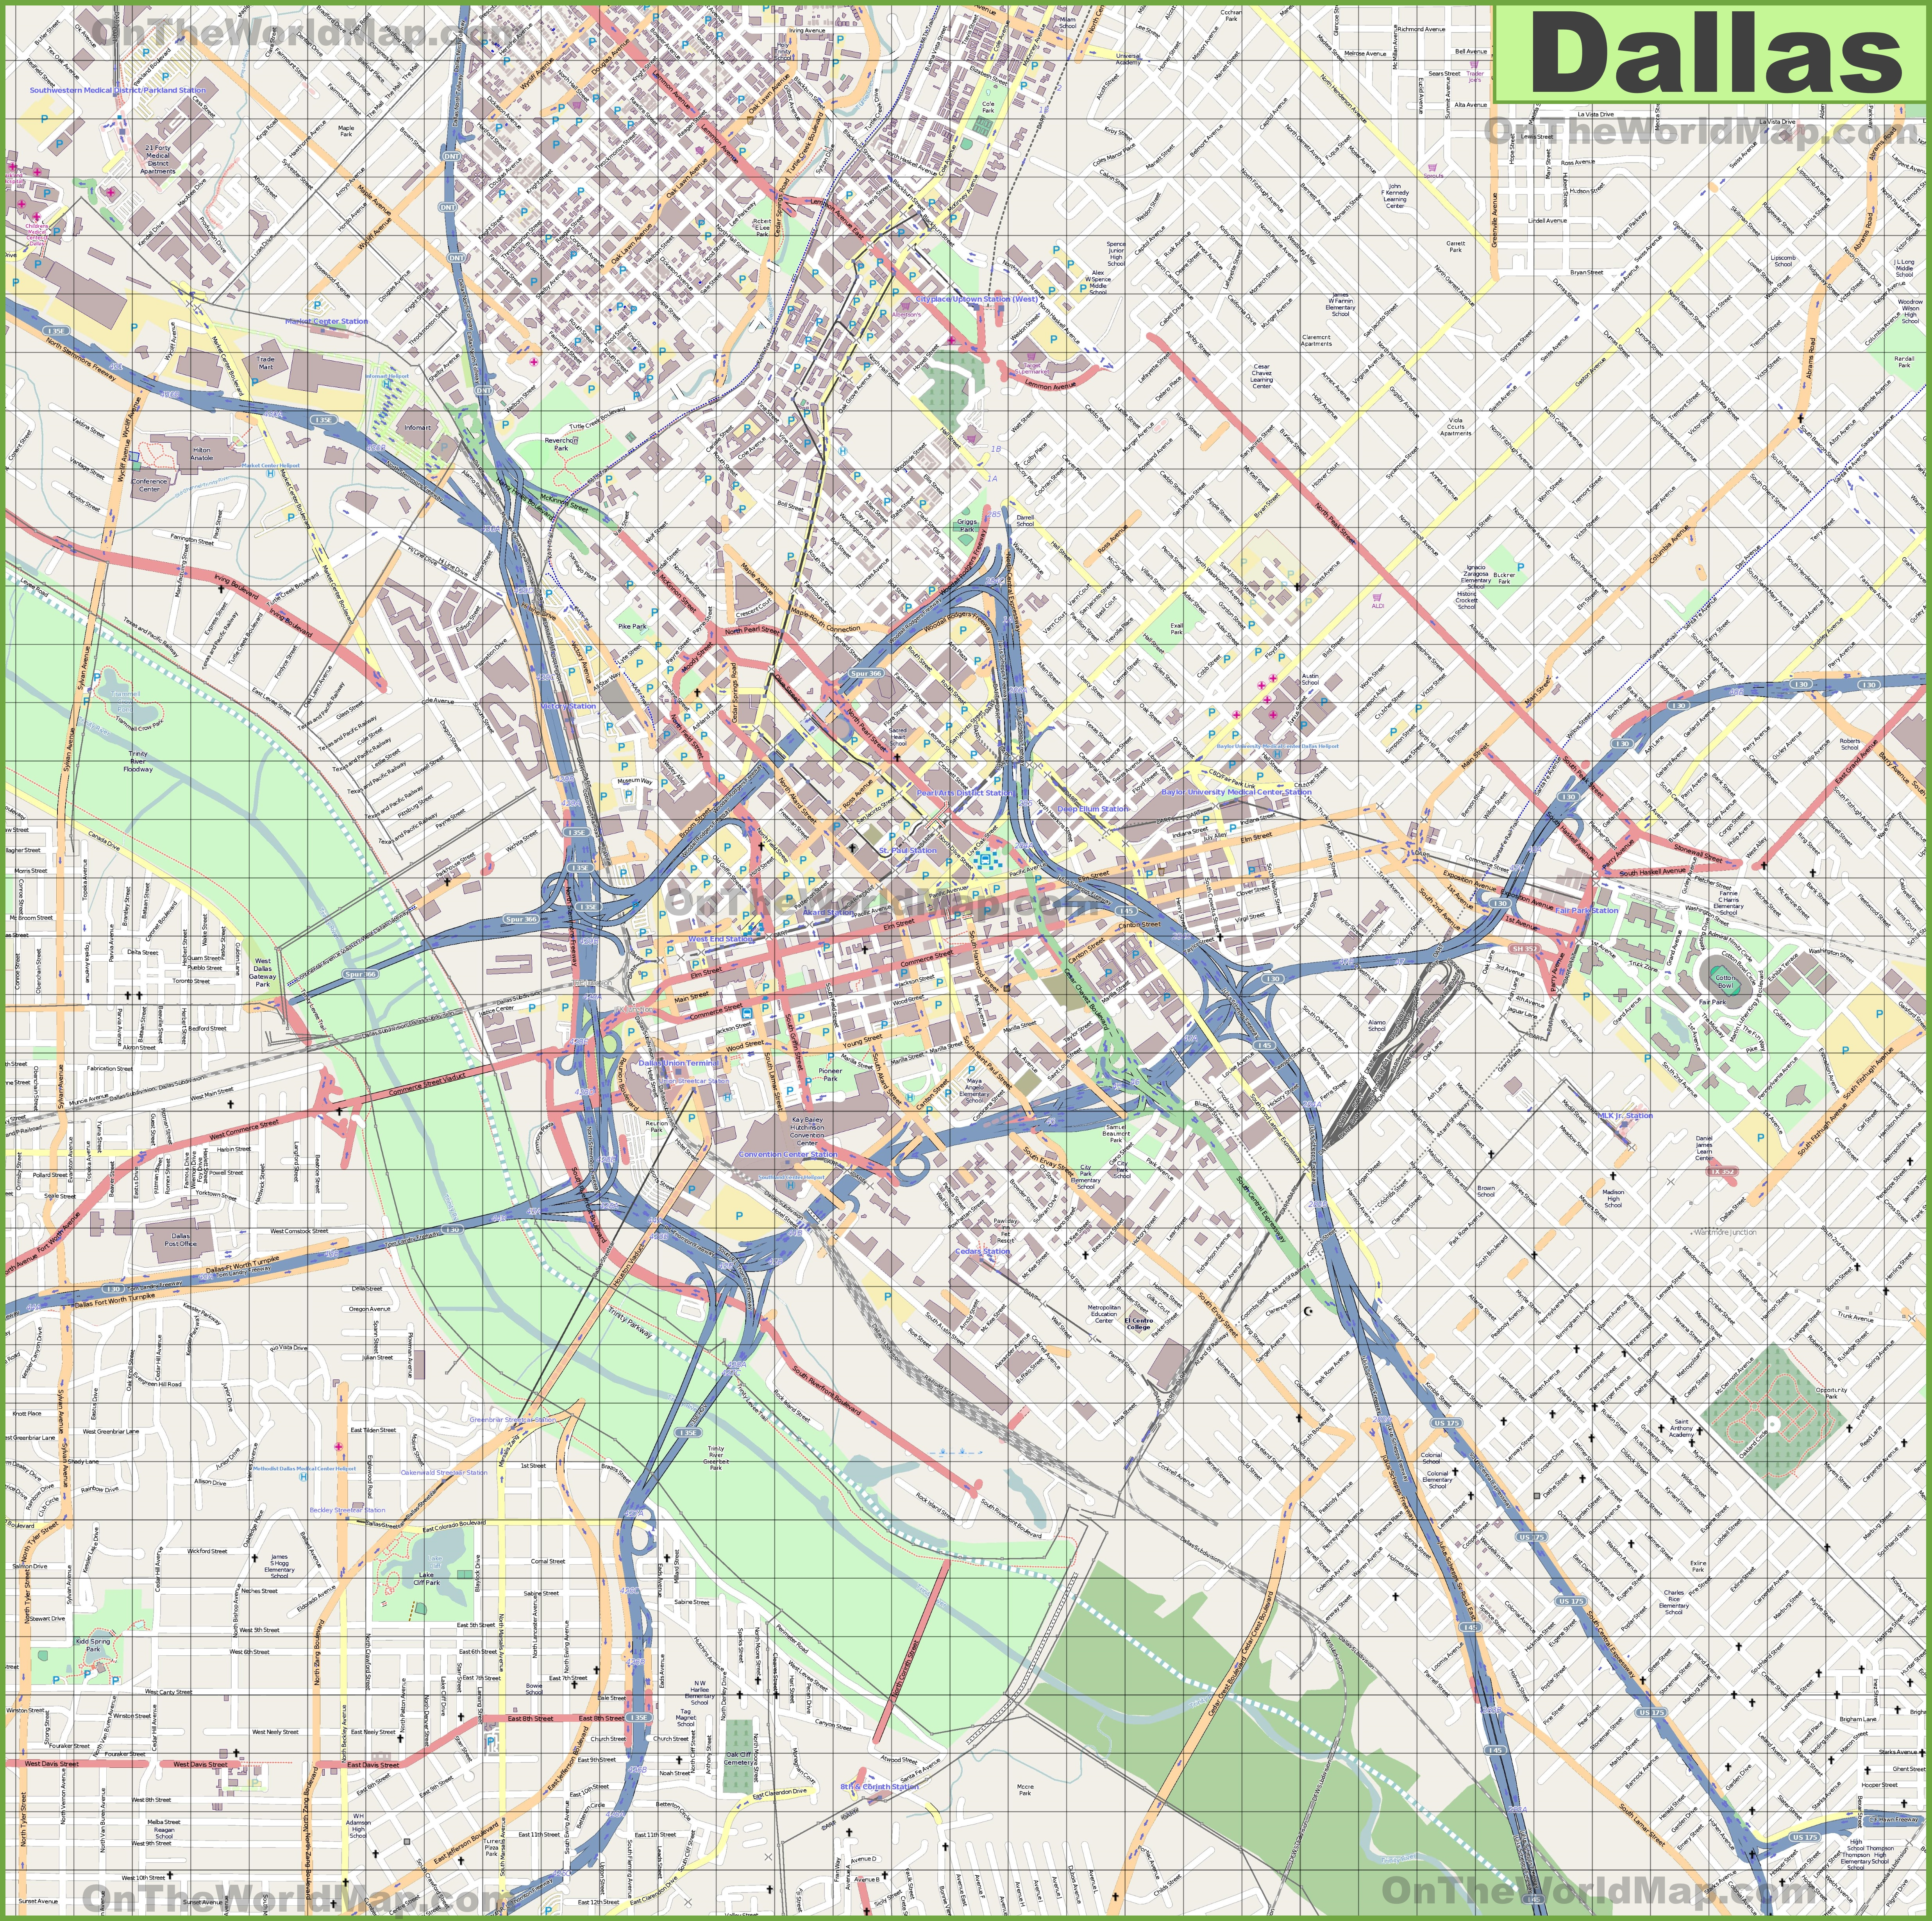 Large Detailed Street Map Of Dallas - Dallas Map Of Texas